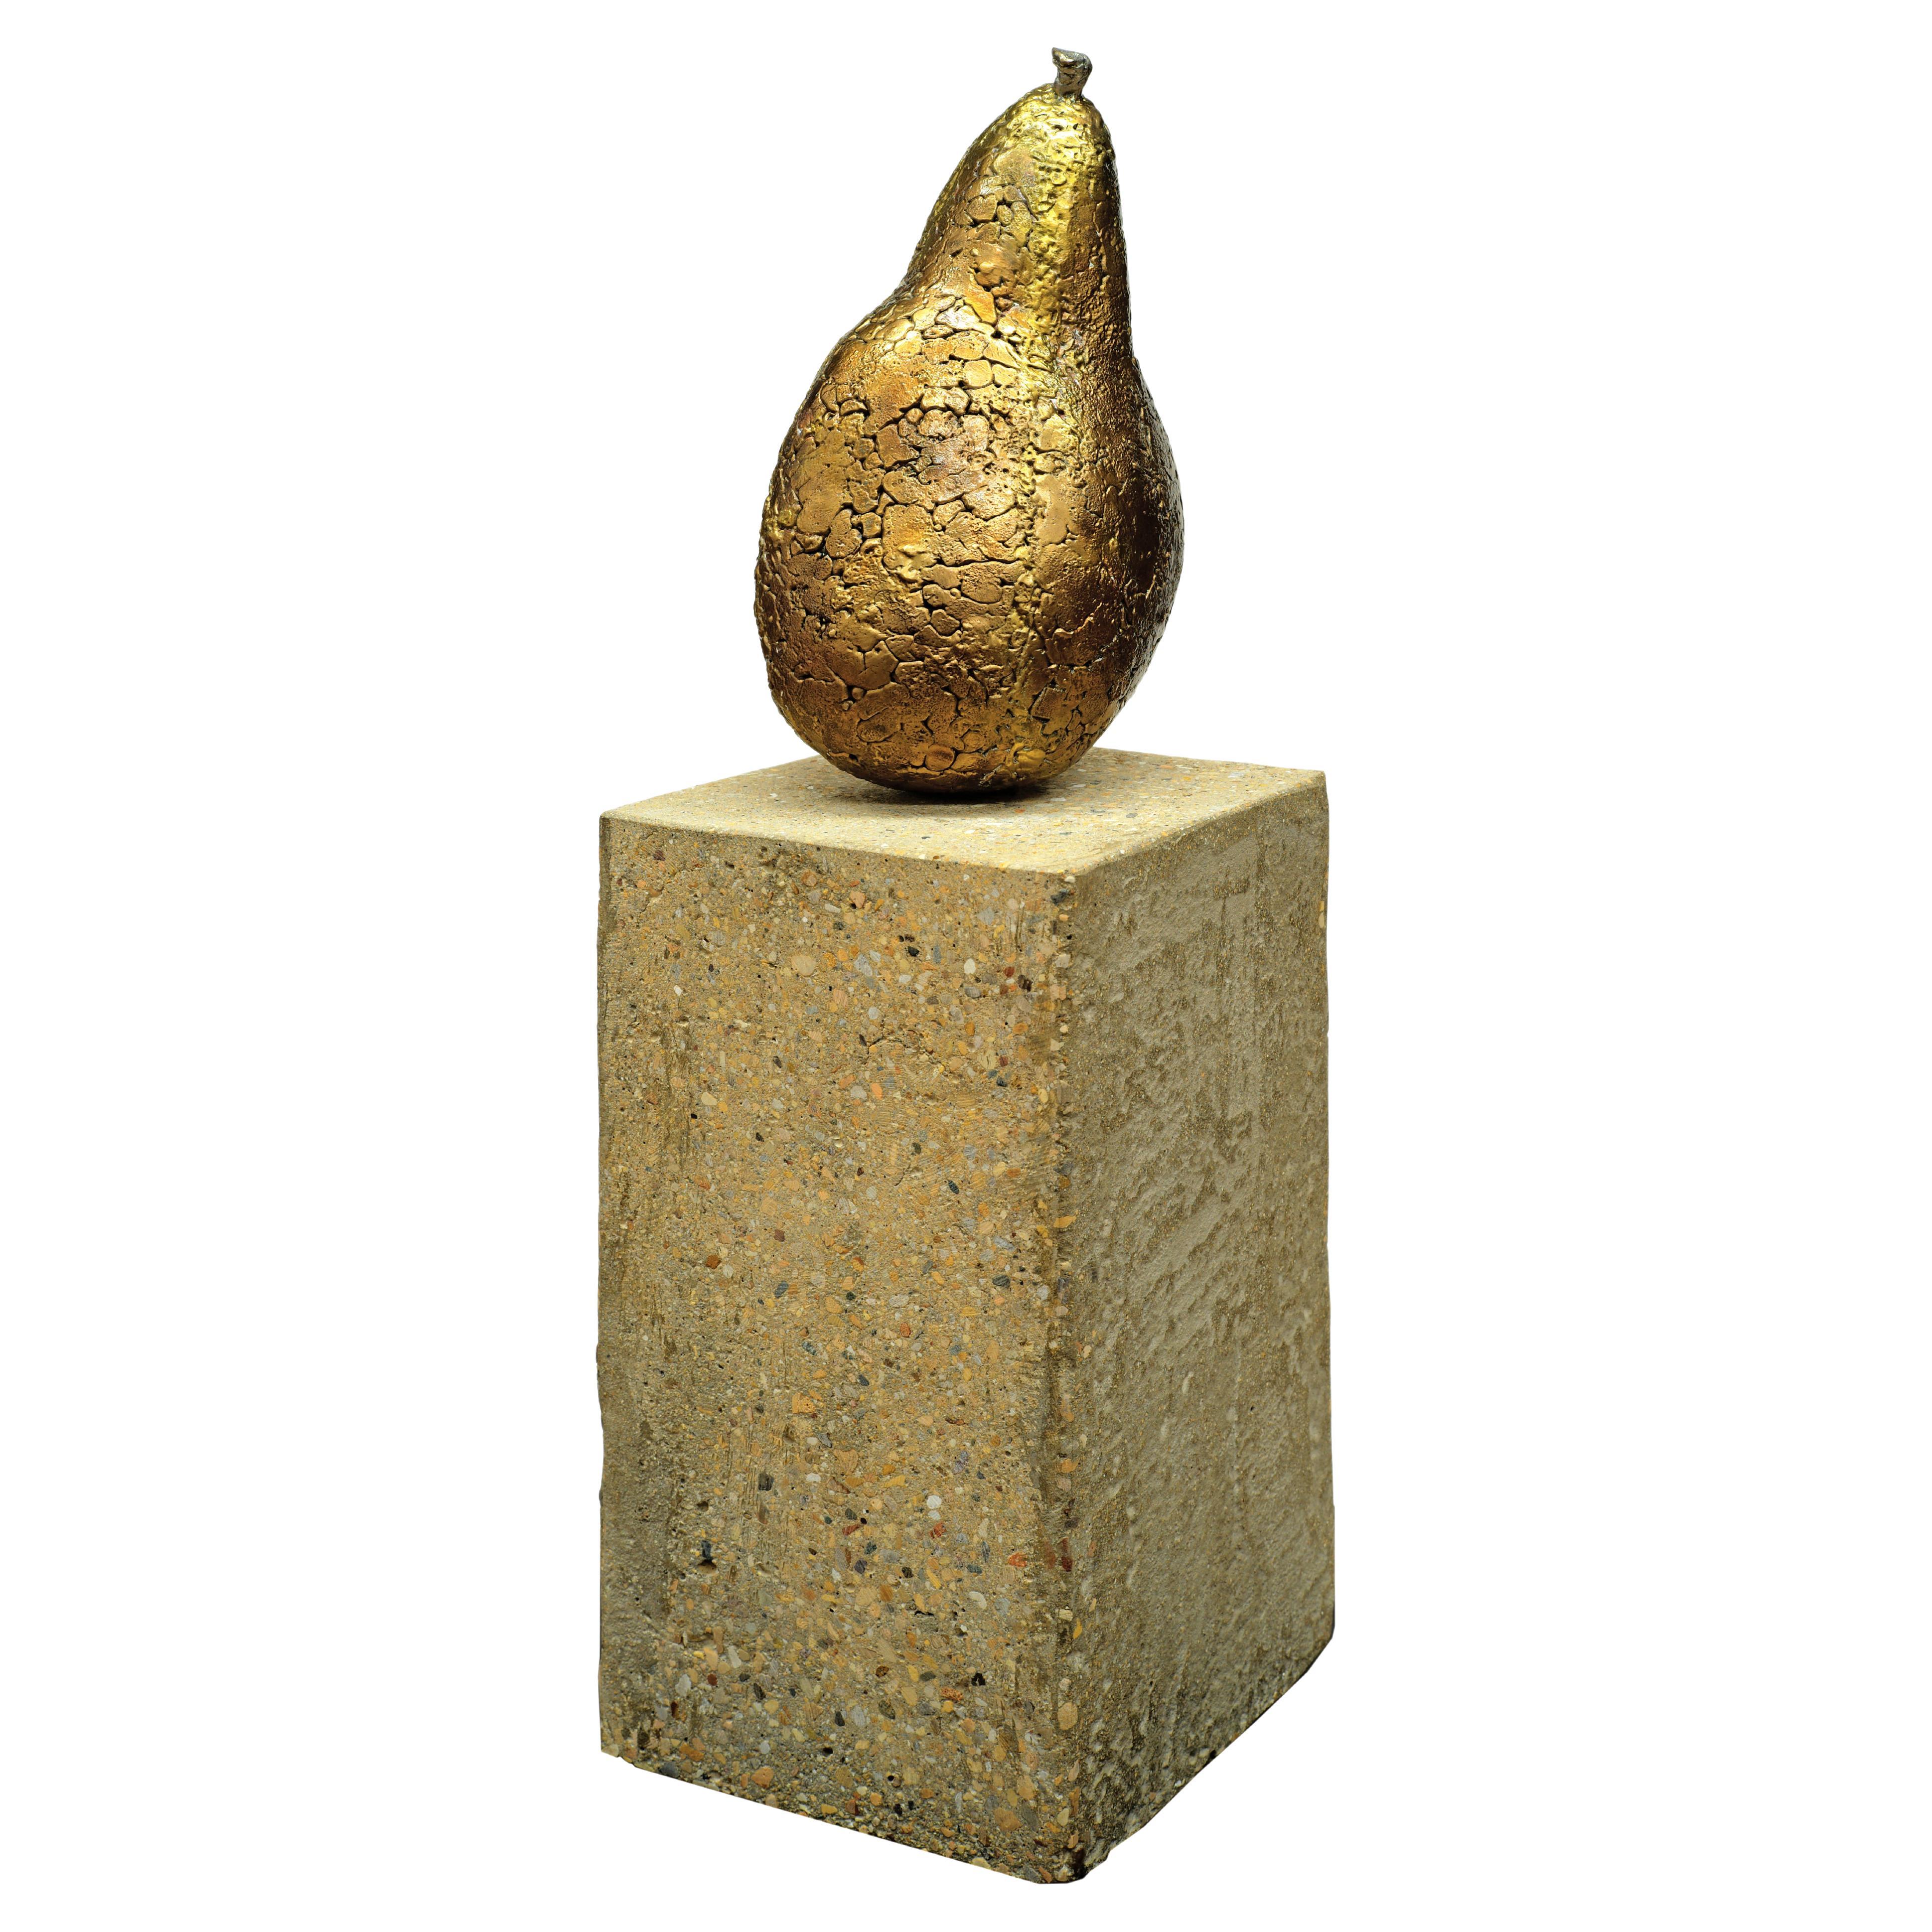 Autumn Pear, Bronze Sculpture with Textured Golden Surface on Concrete Base For Sale